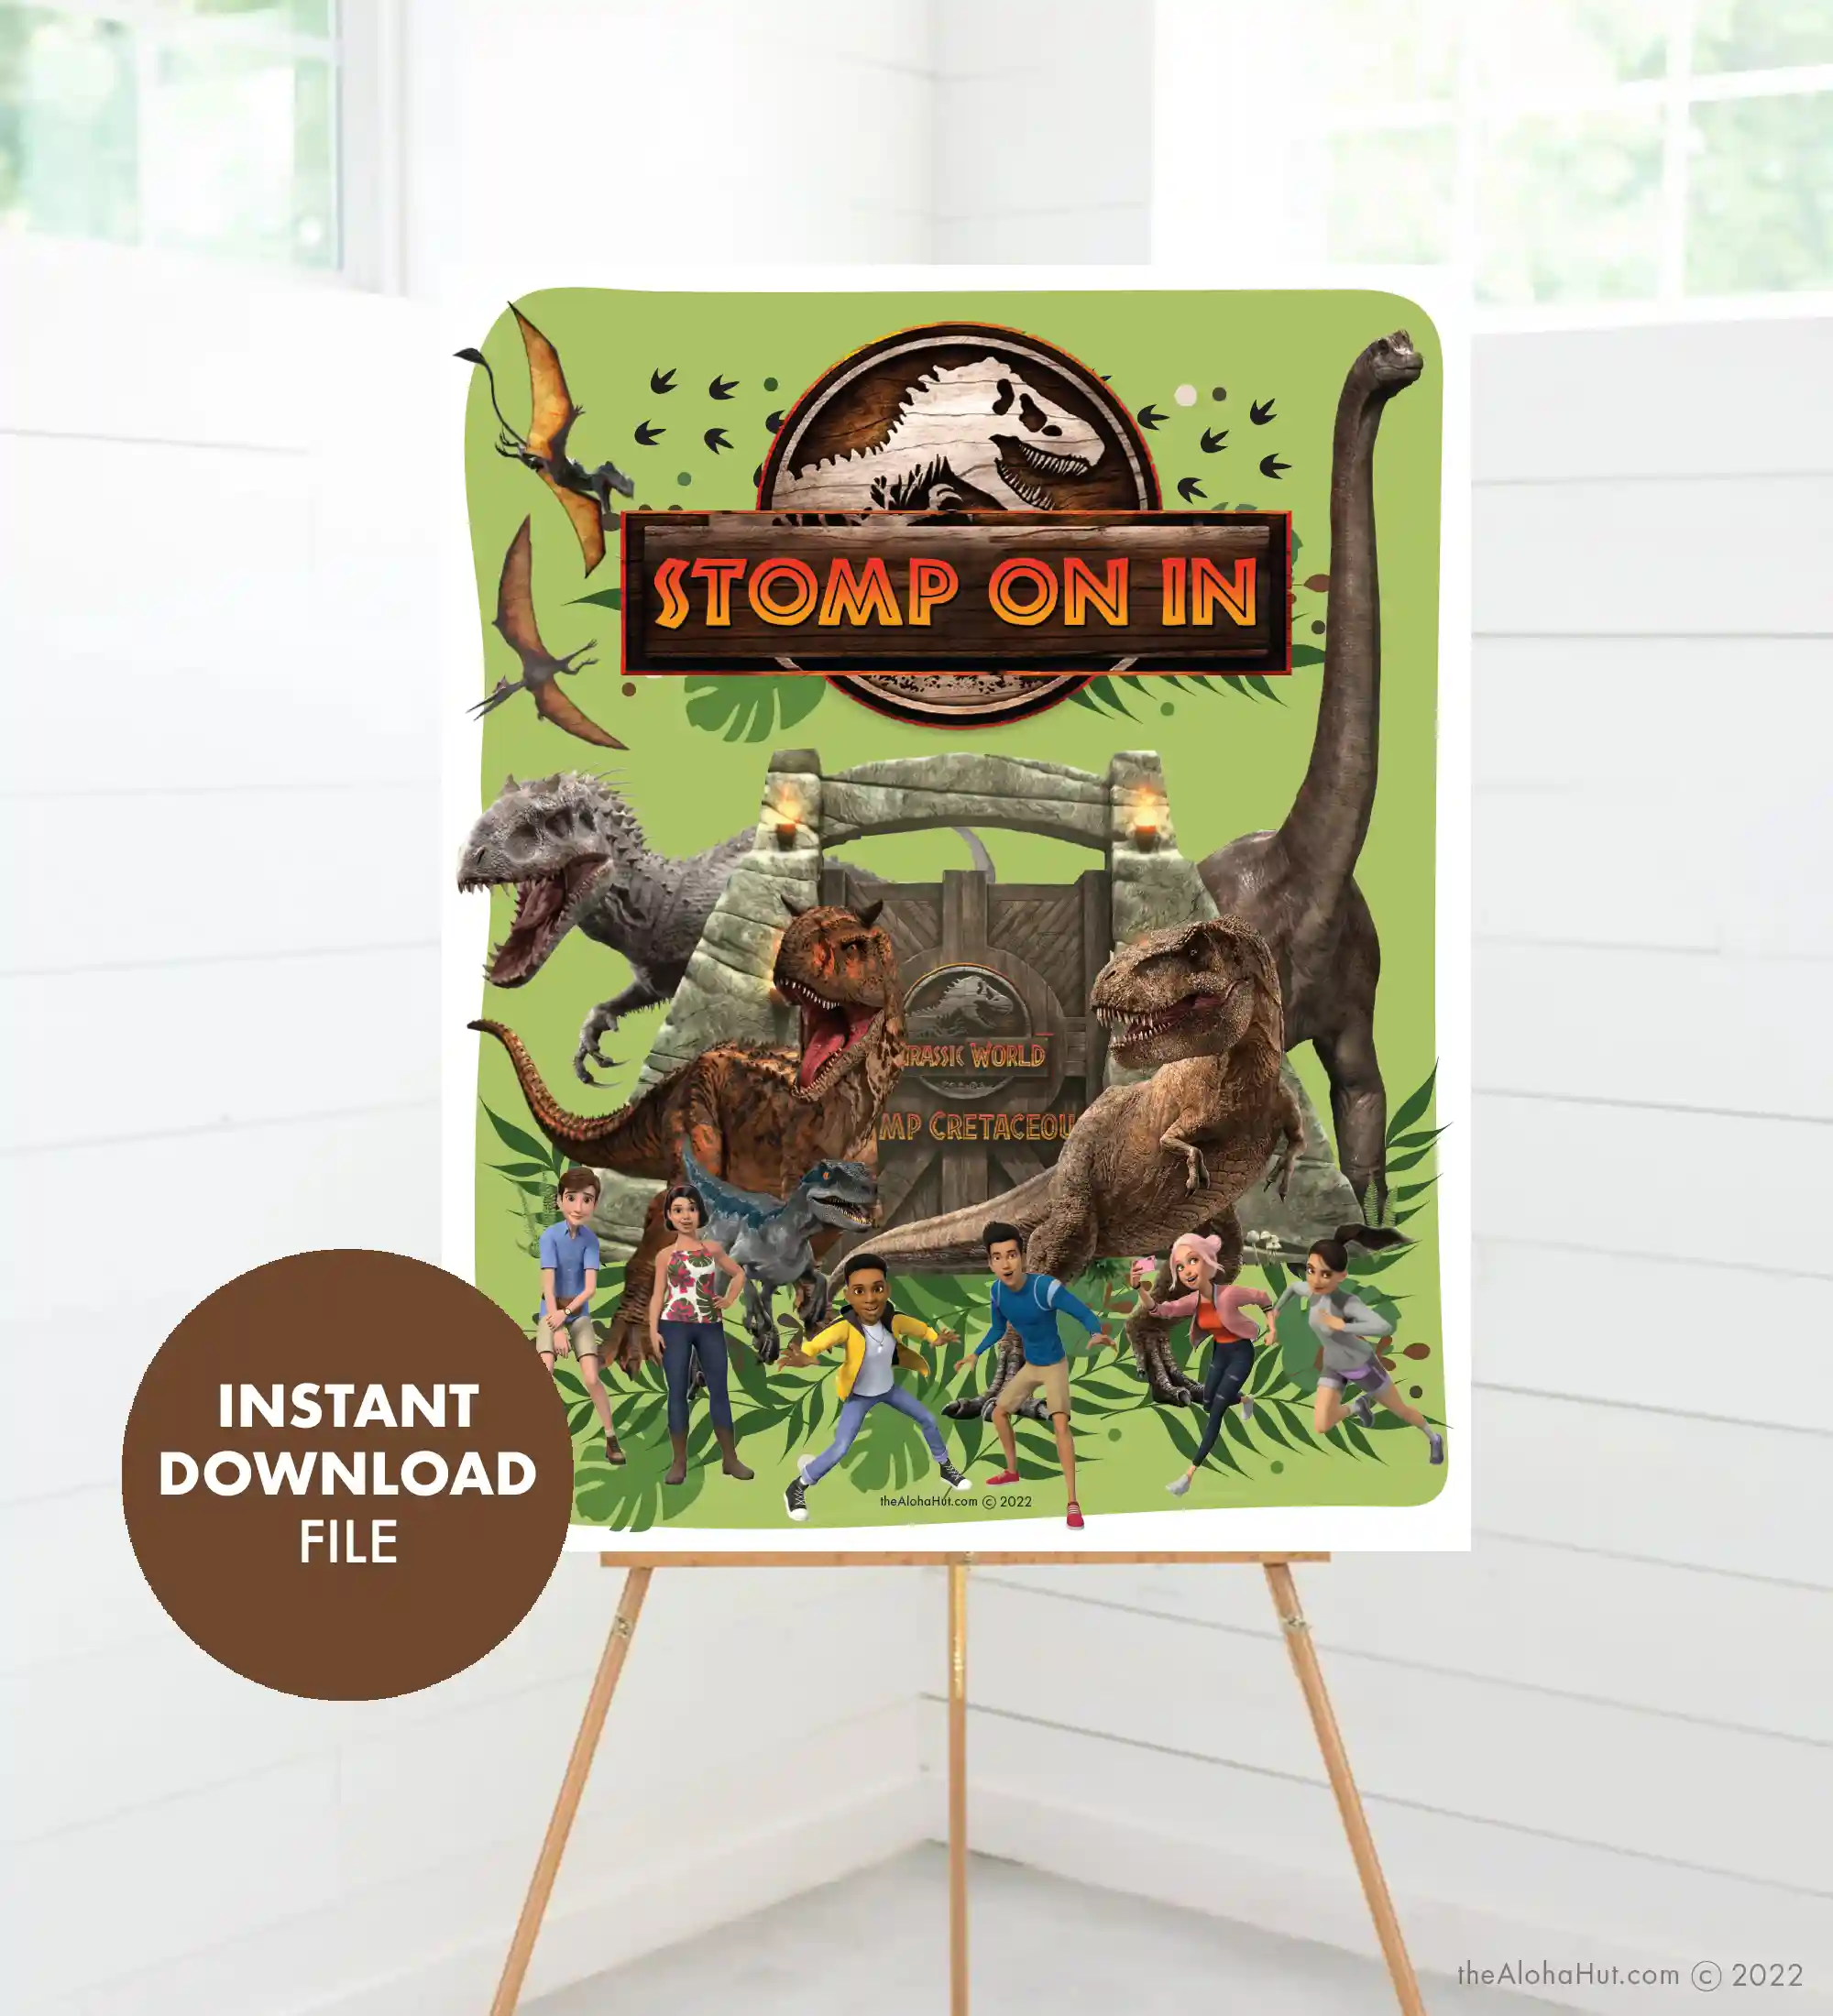 Jurassic World Camp Cretaceous Party Ideas - Dinosaur Party Ideas - free printable party decor & games - welcome sign